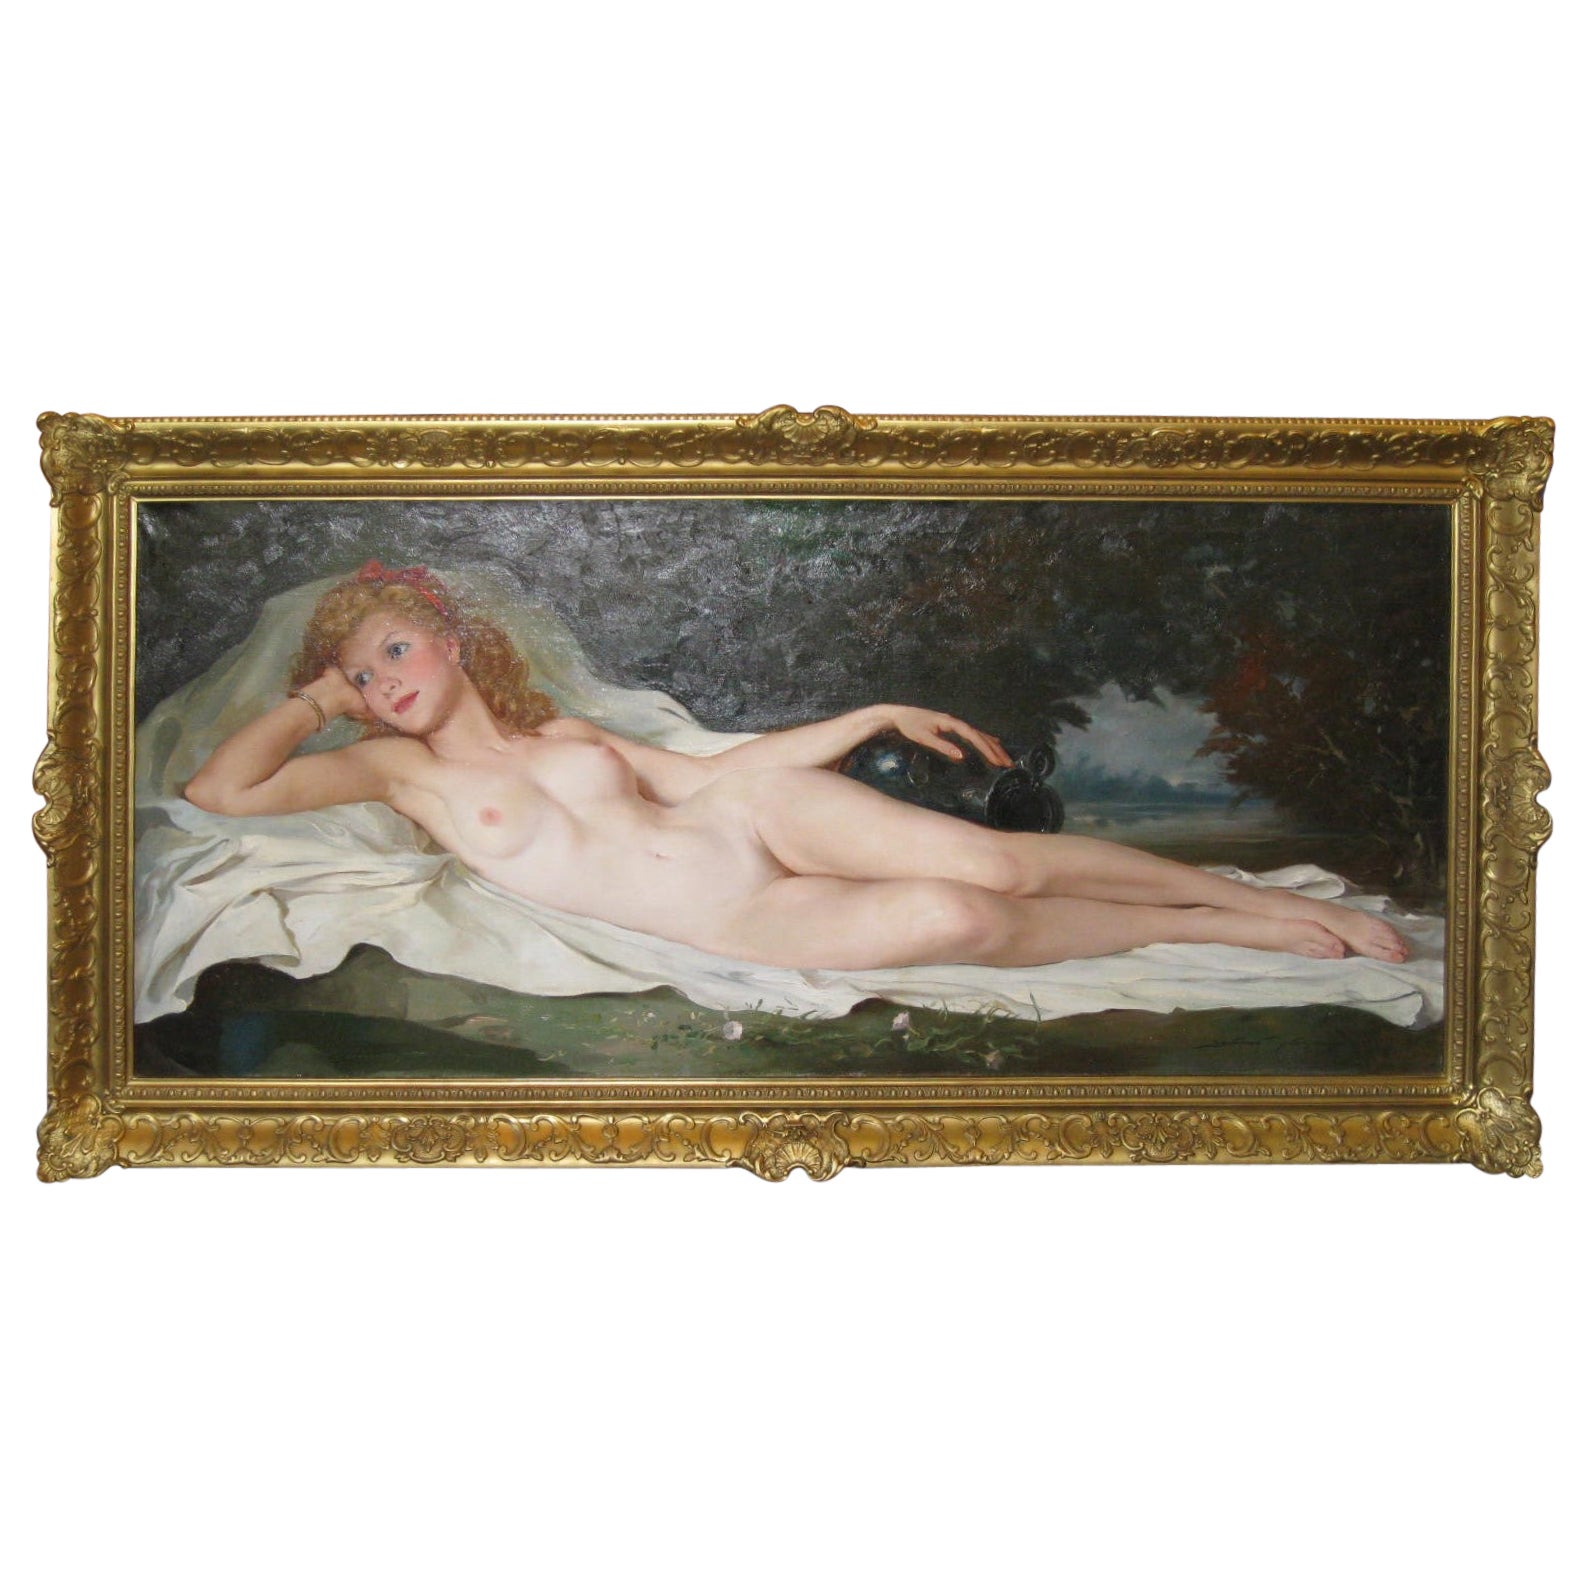 Very Large Original Handpainted Oil on Canvas of a Nude by Maria Szantho